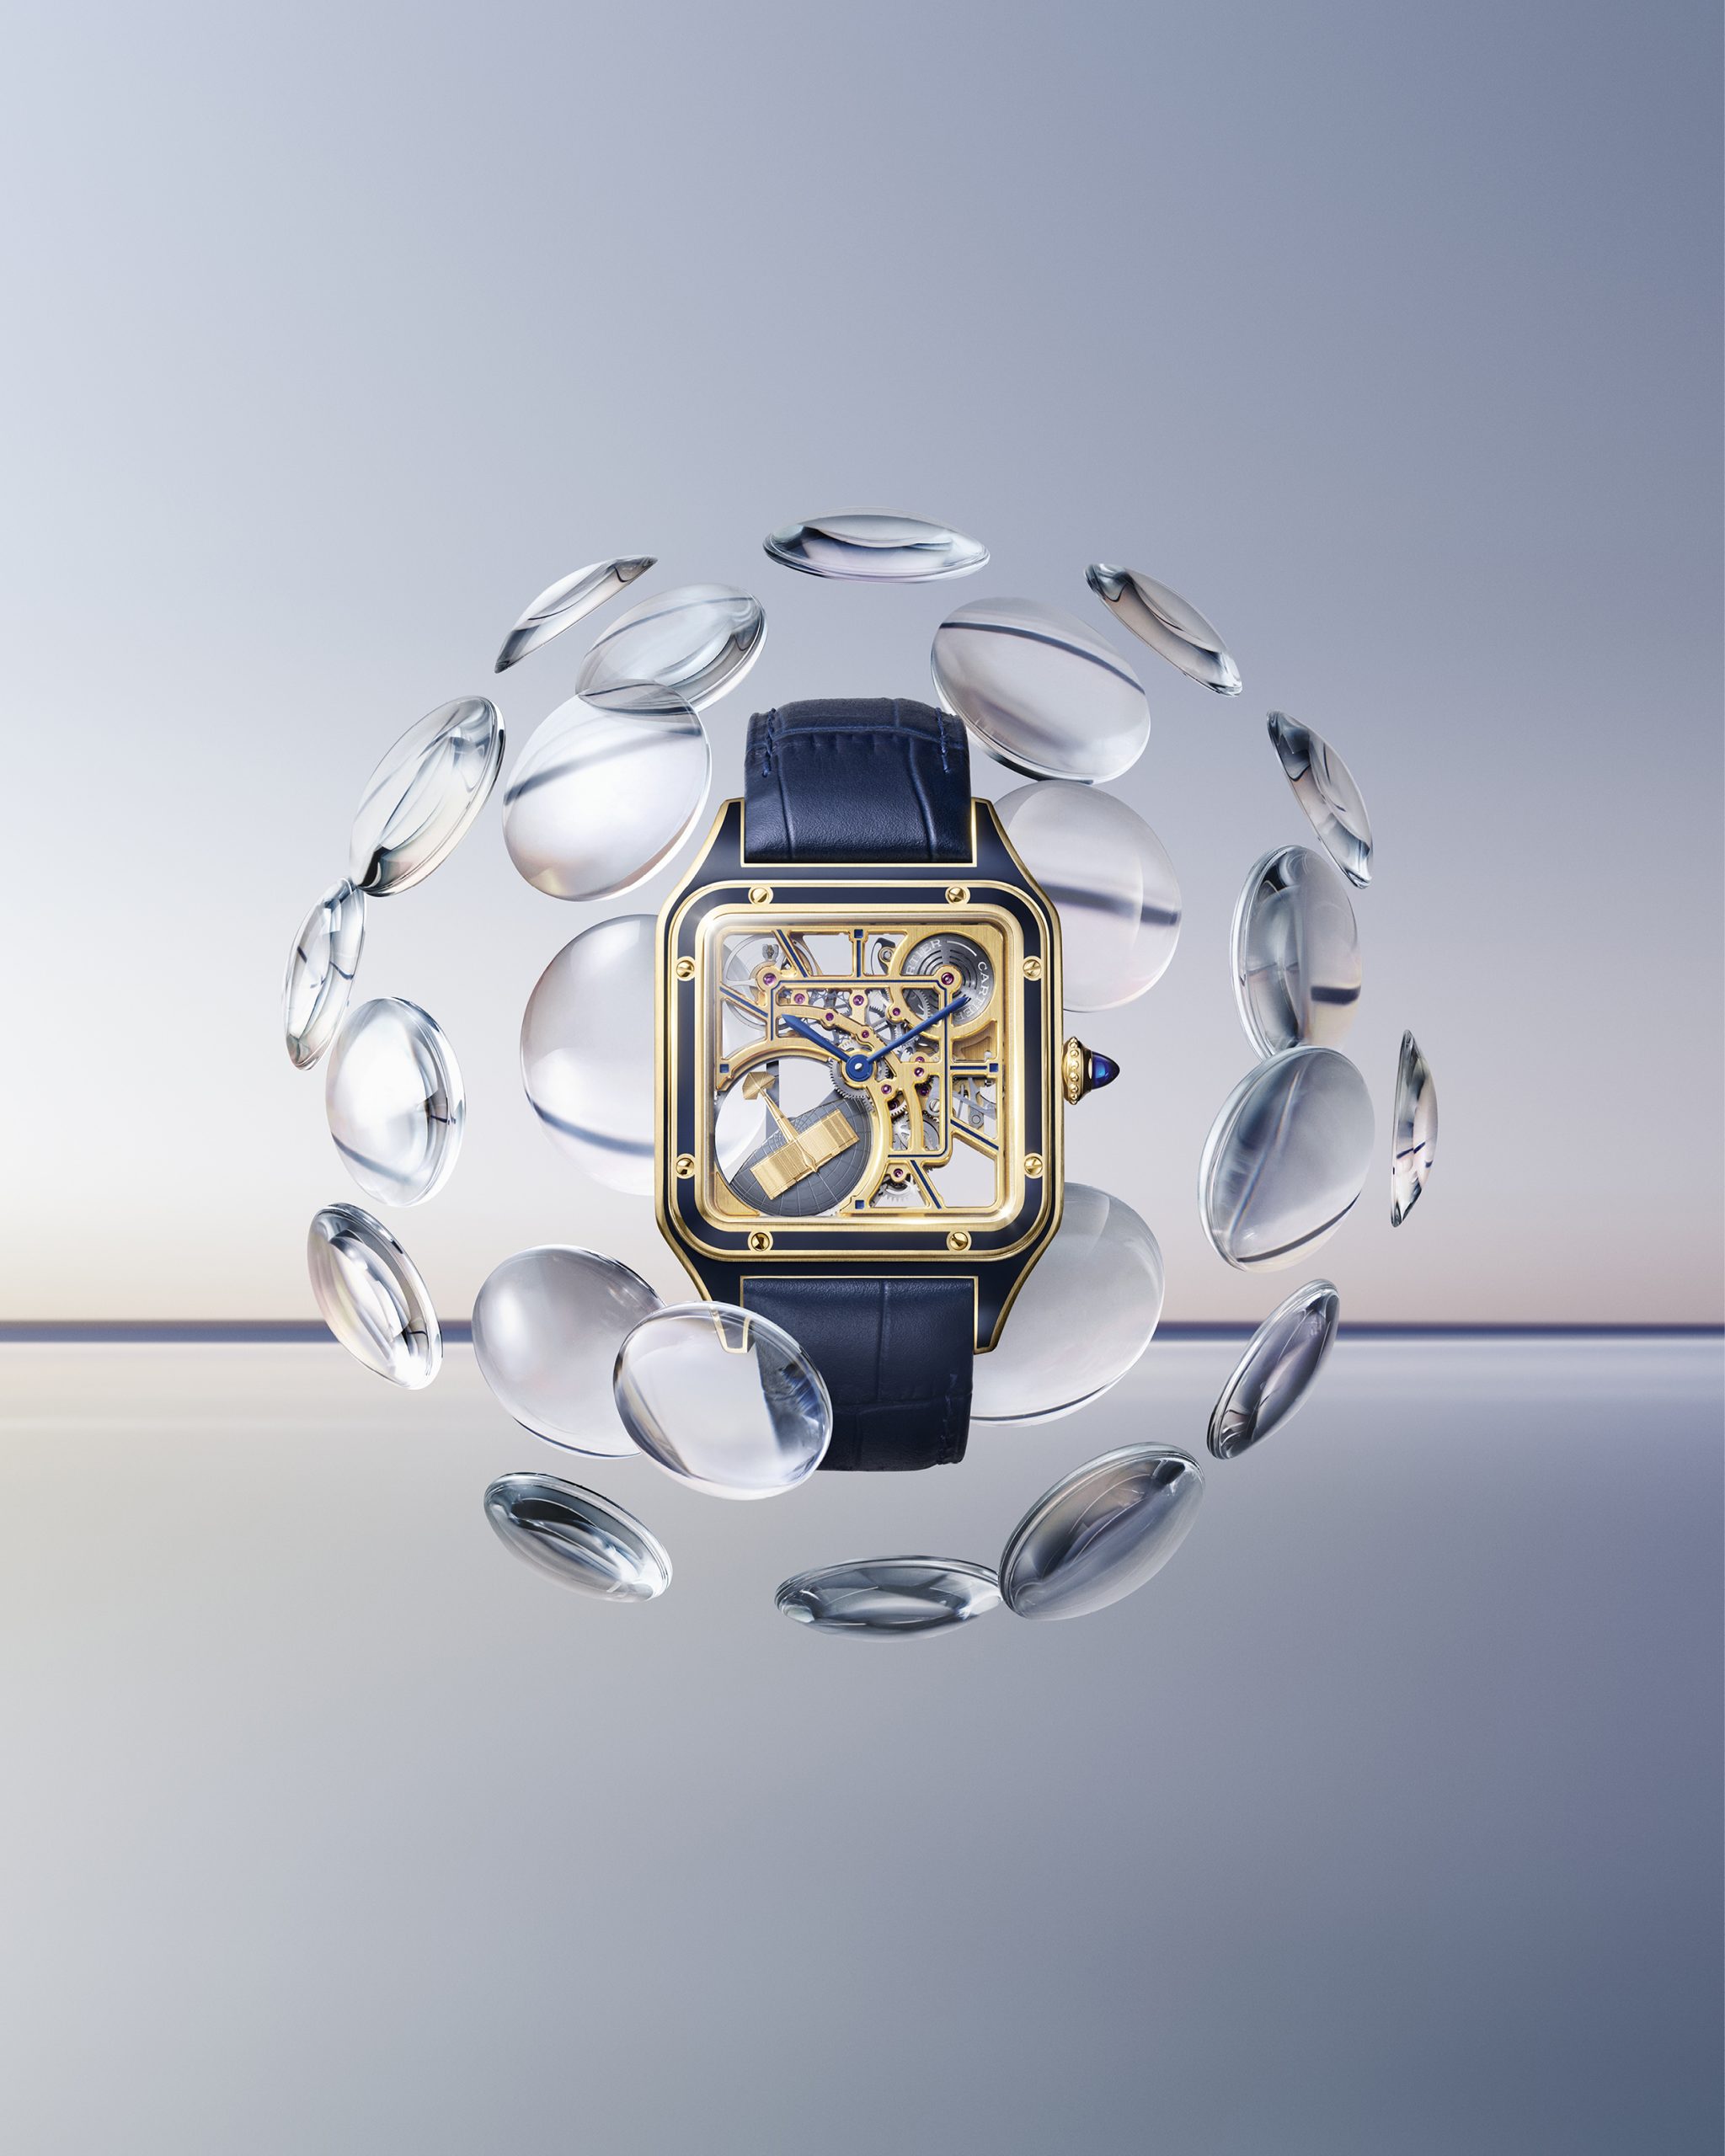 Cartier Serves up a Geometric Spectacle for 2023